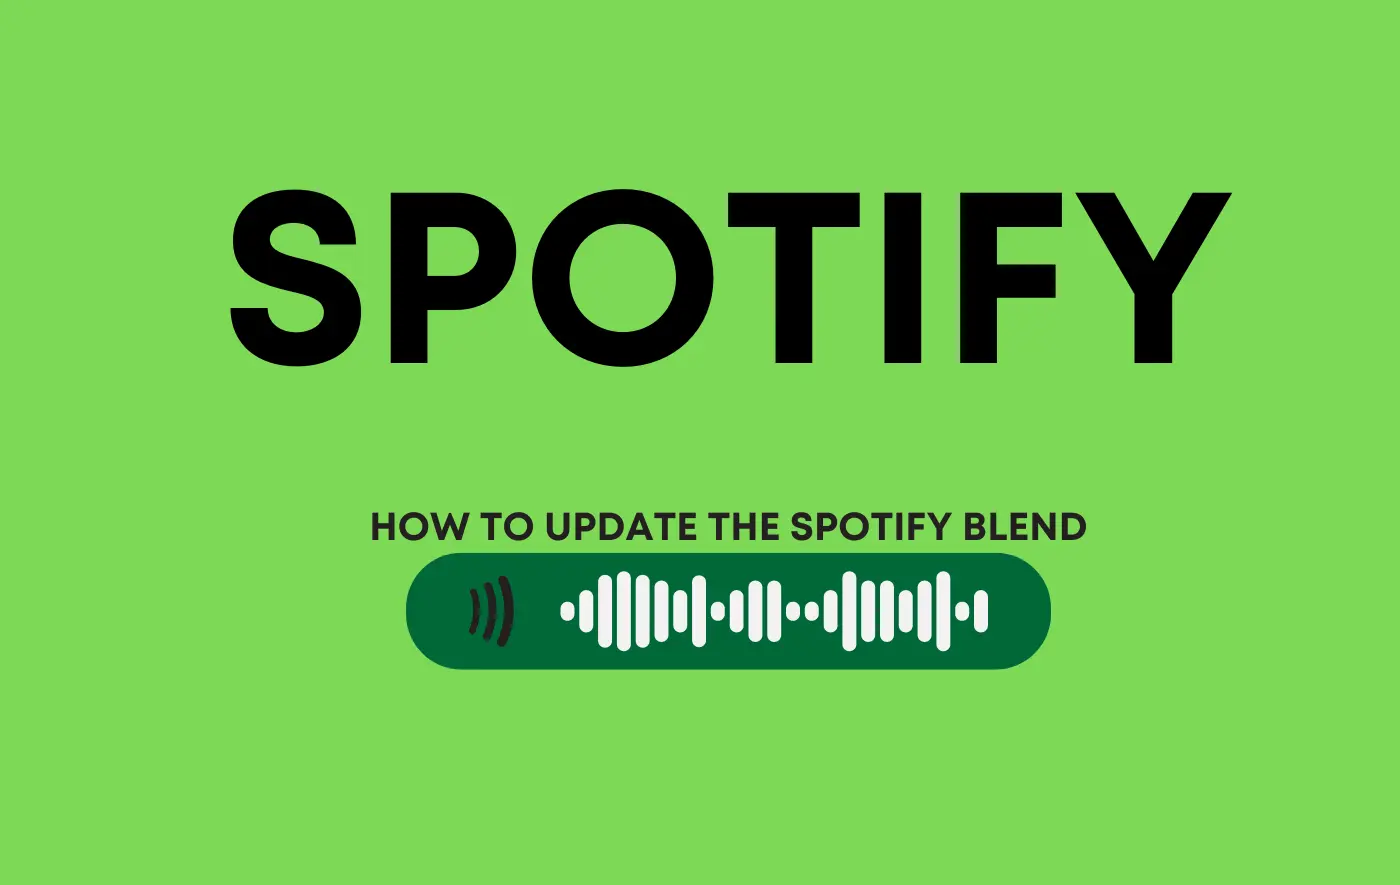 Update the Spotify Blend how? fix problems? Spotify blend?